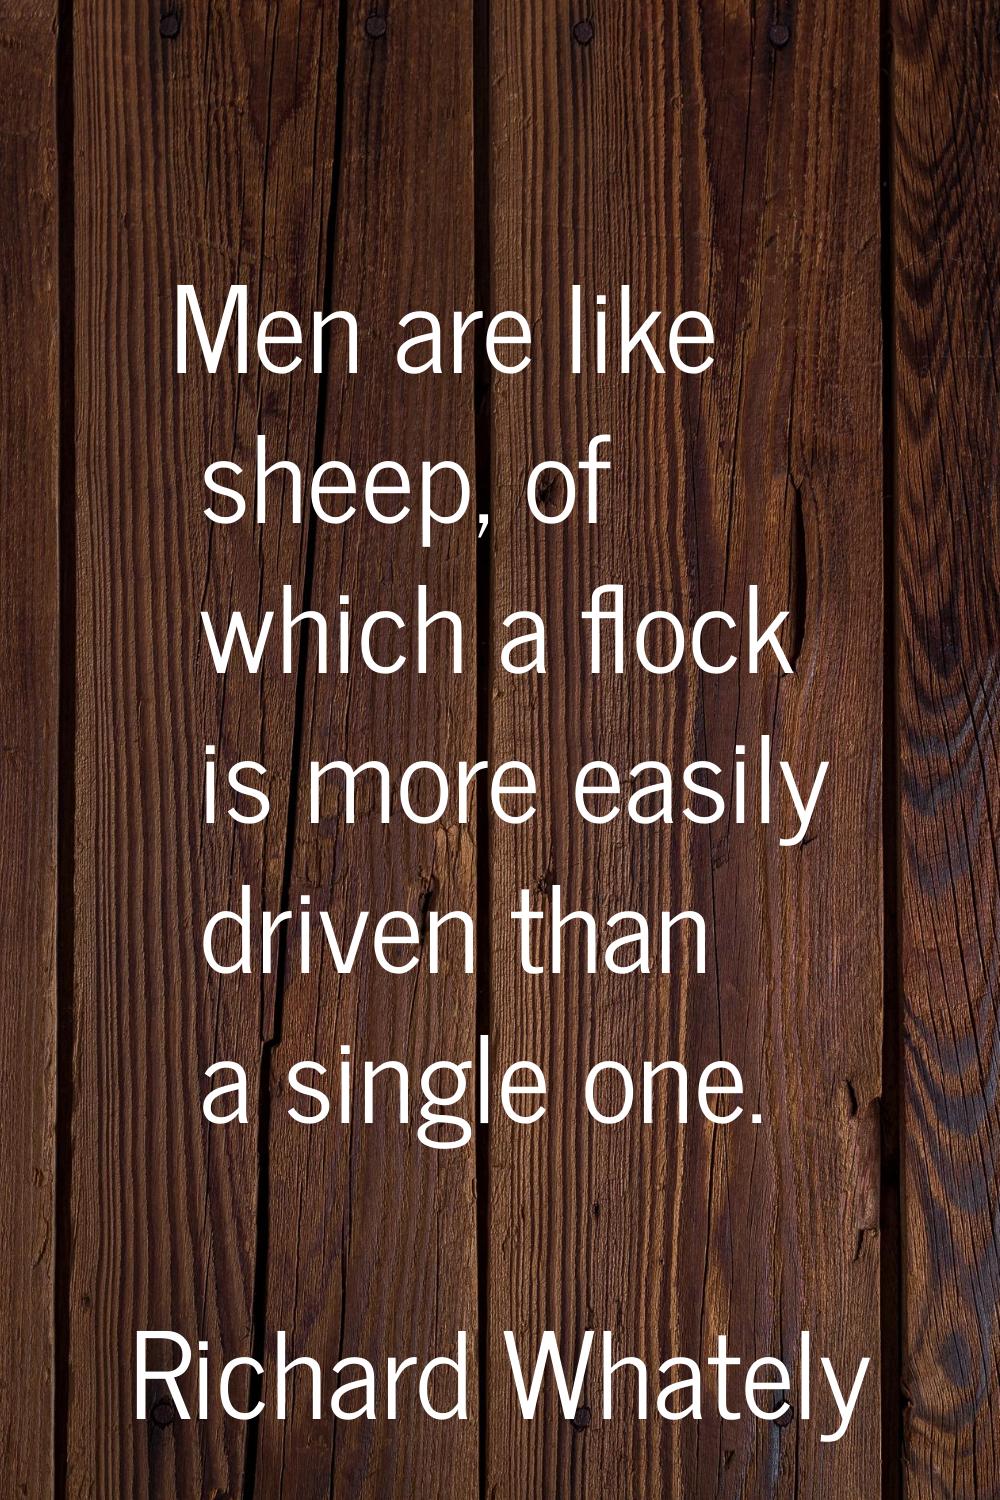 Men are like sheep, of which a flock is more easily driven than a single one.